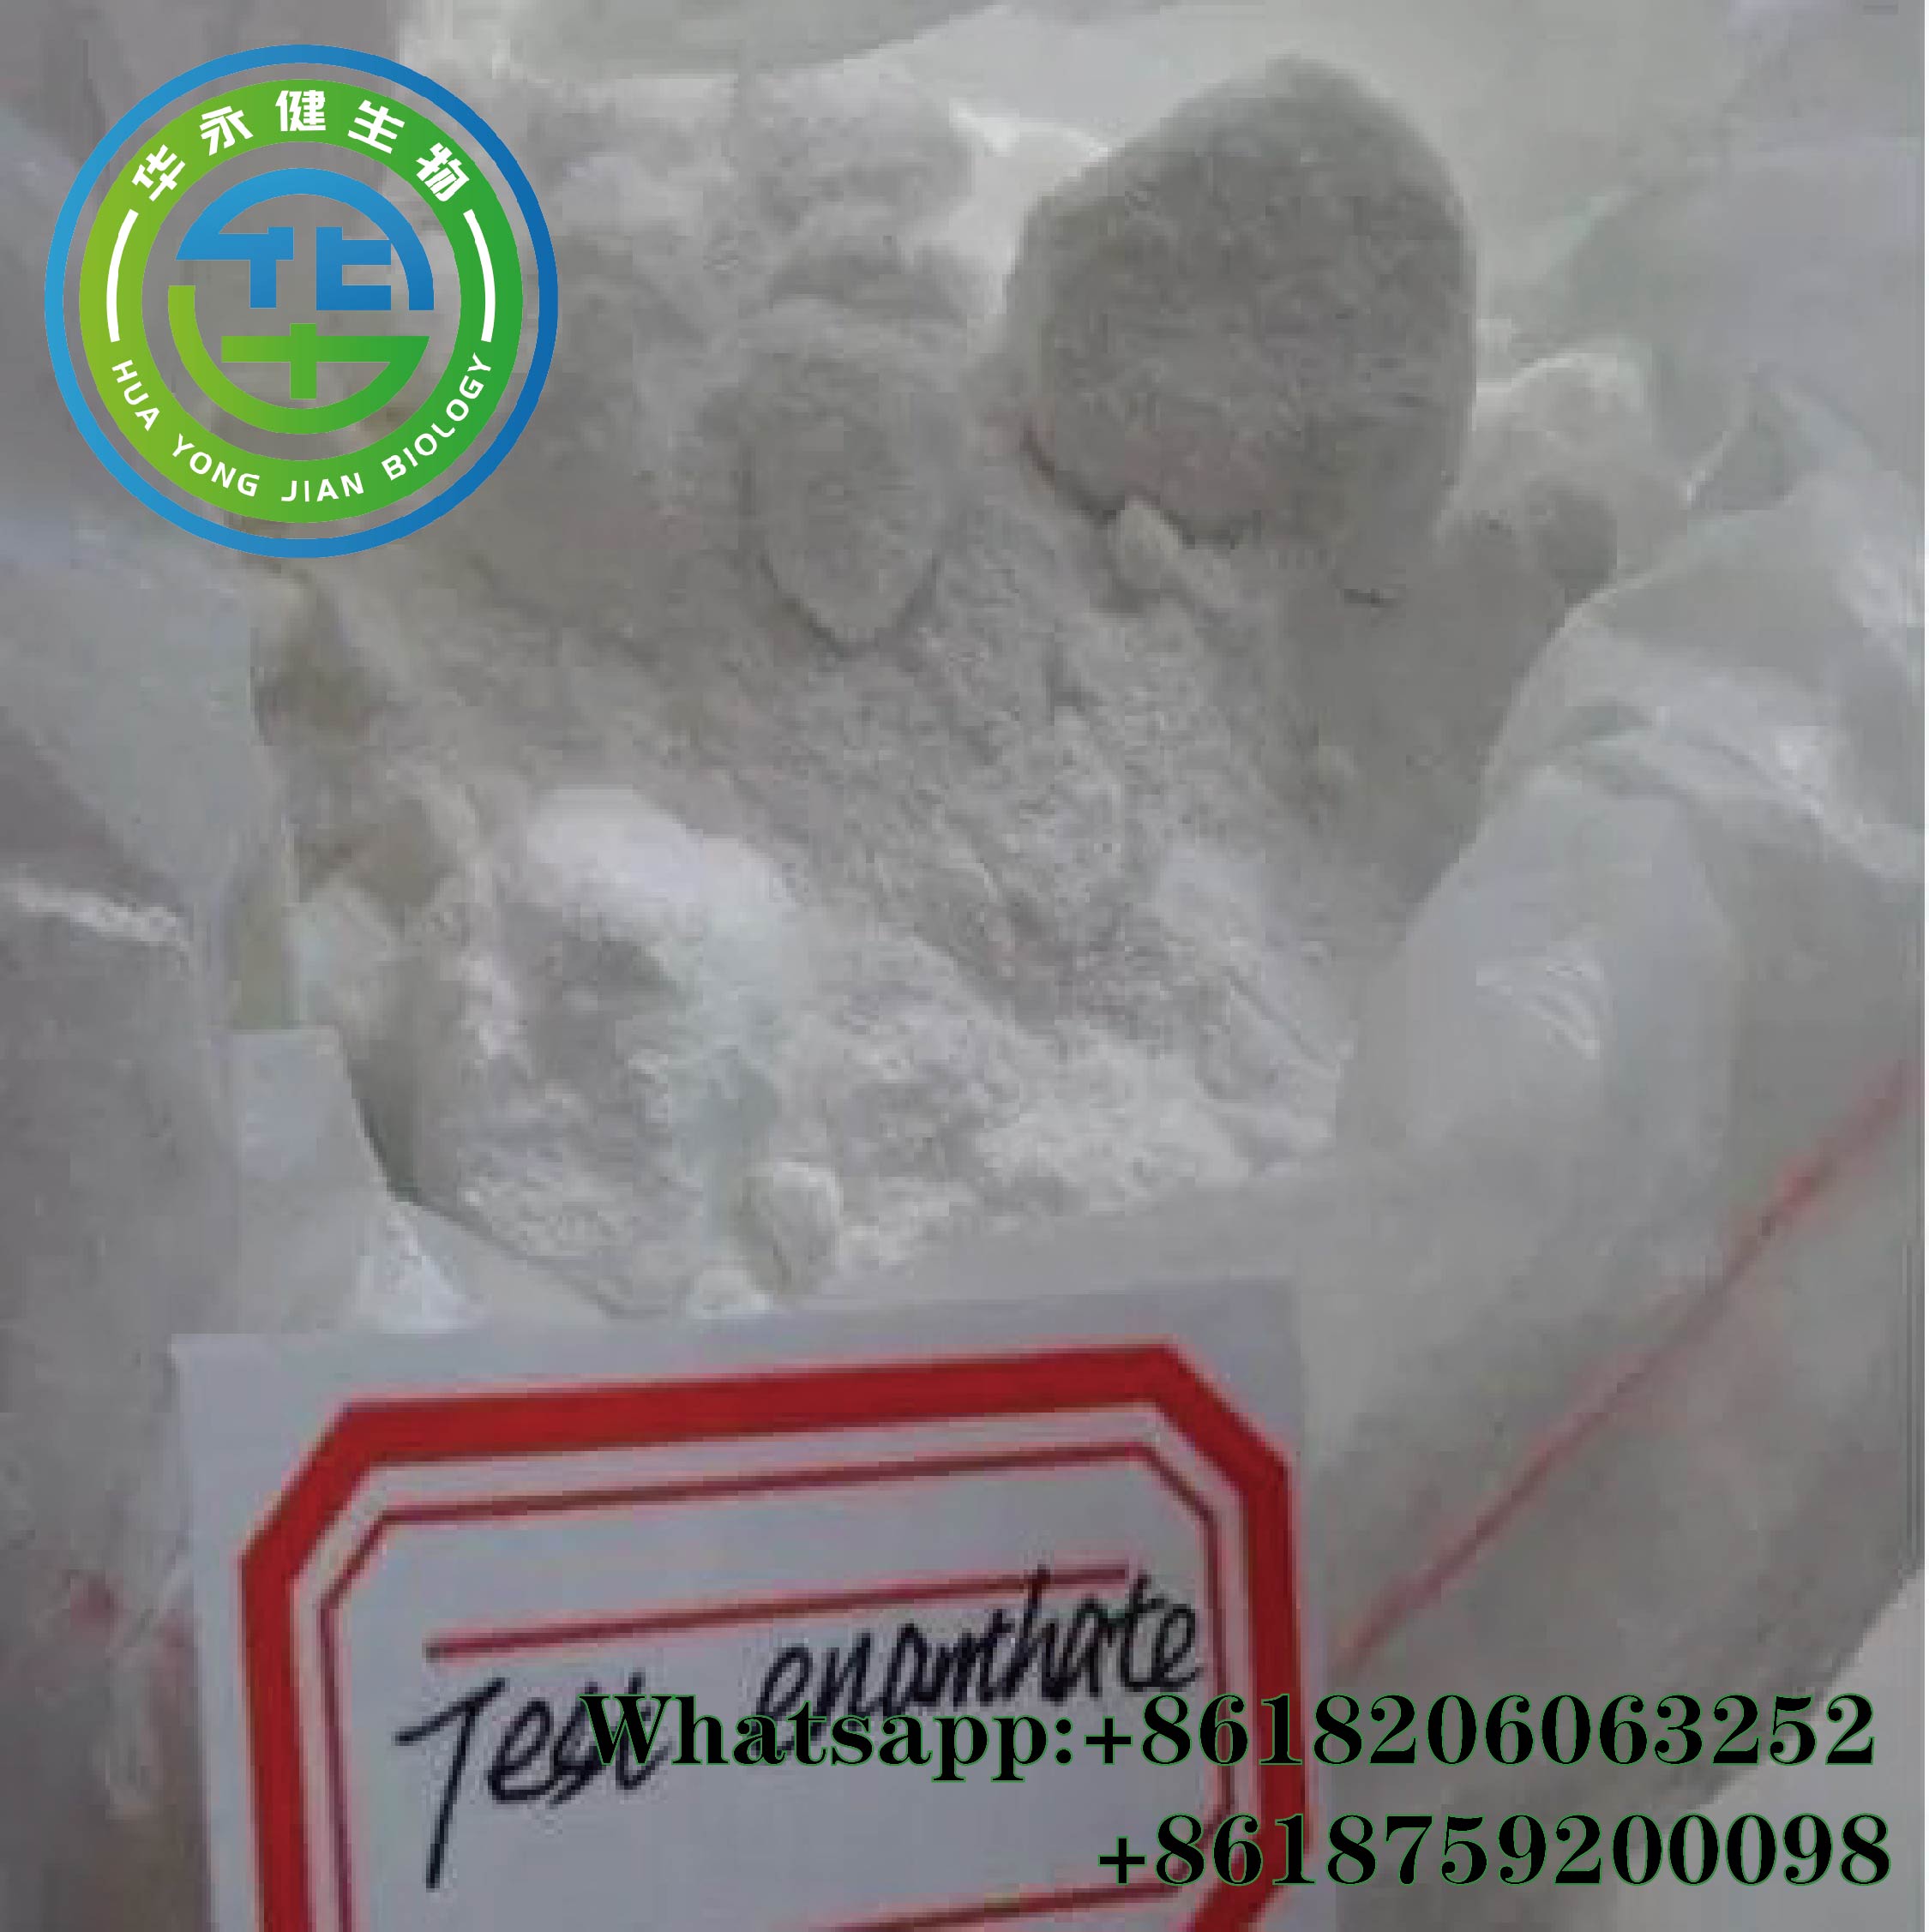 Testosterone Enanthate raw steroid test powder Test Enanthate Healthy Injectable Anabolic Steroids For Muscle Building CAS 315-37-7 